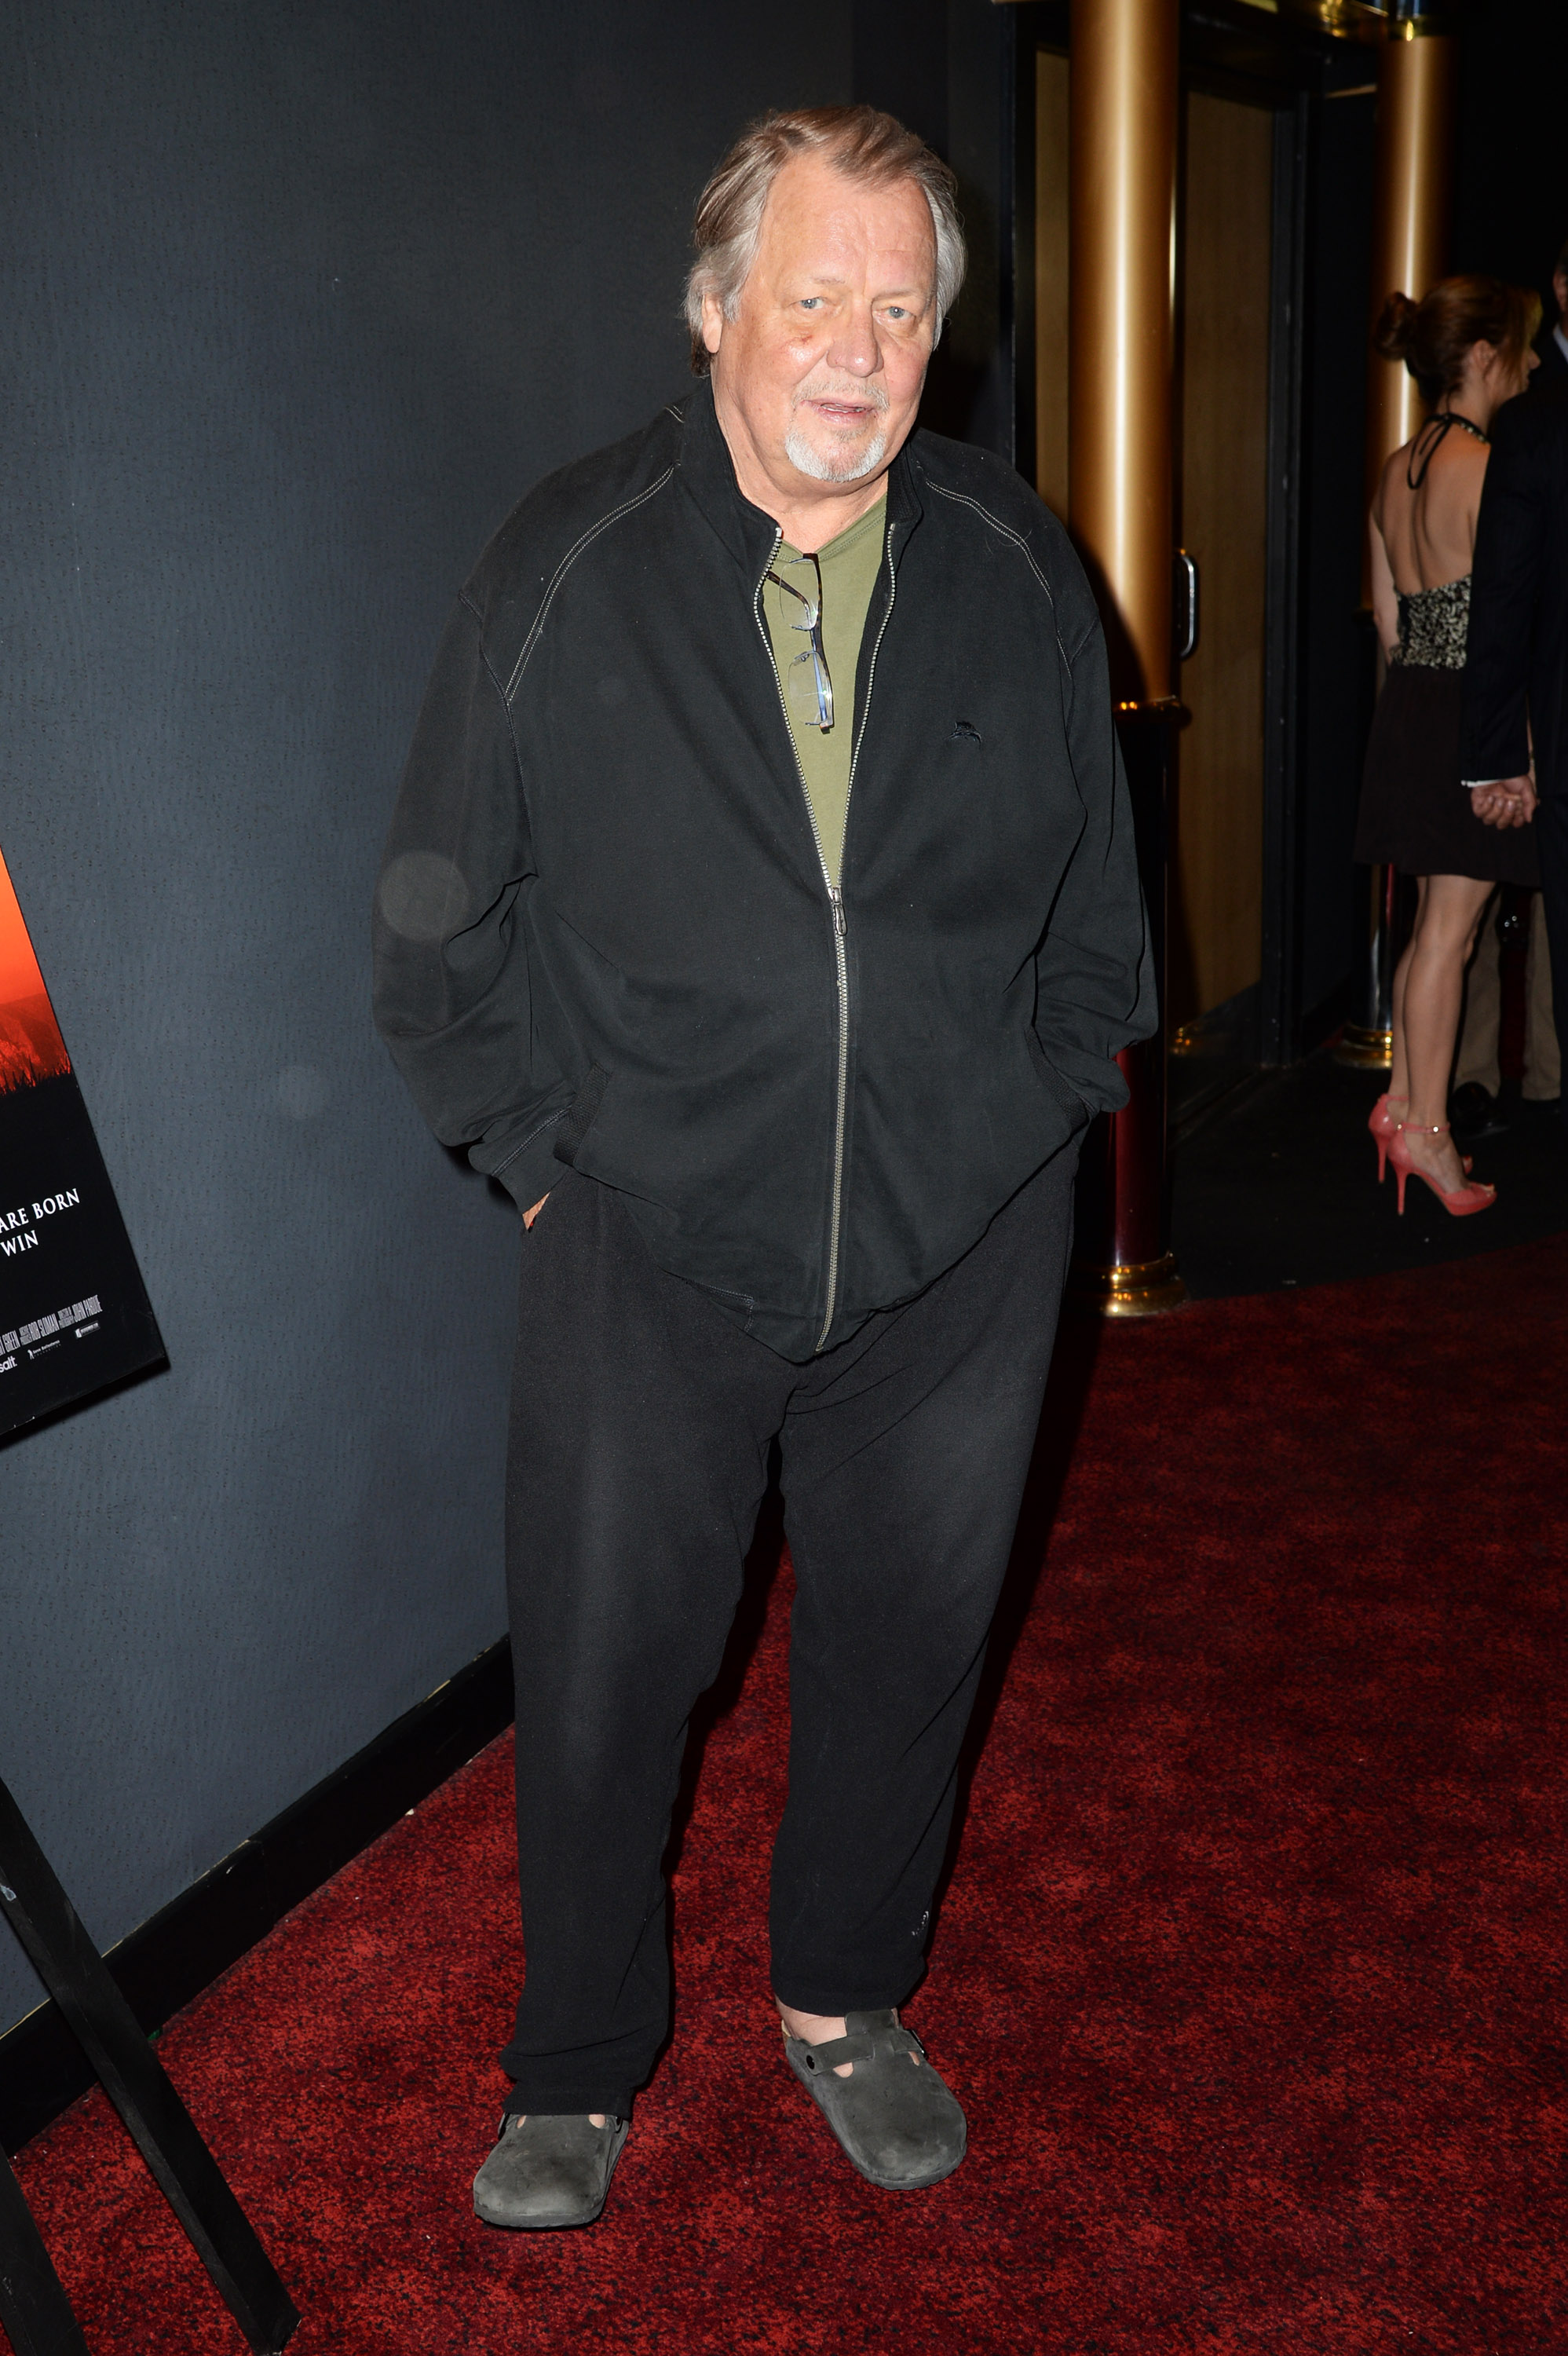  David Soul on June 23, 2014 in London, England | Source: Getty Images